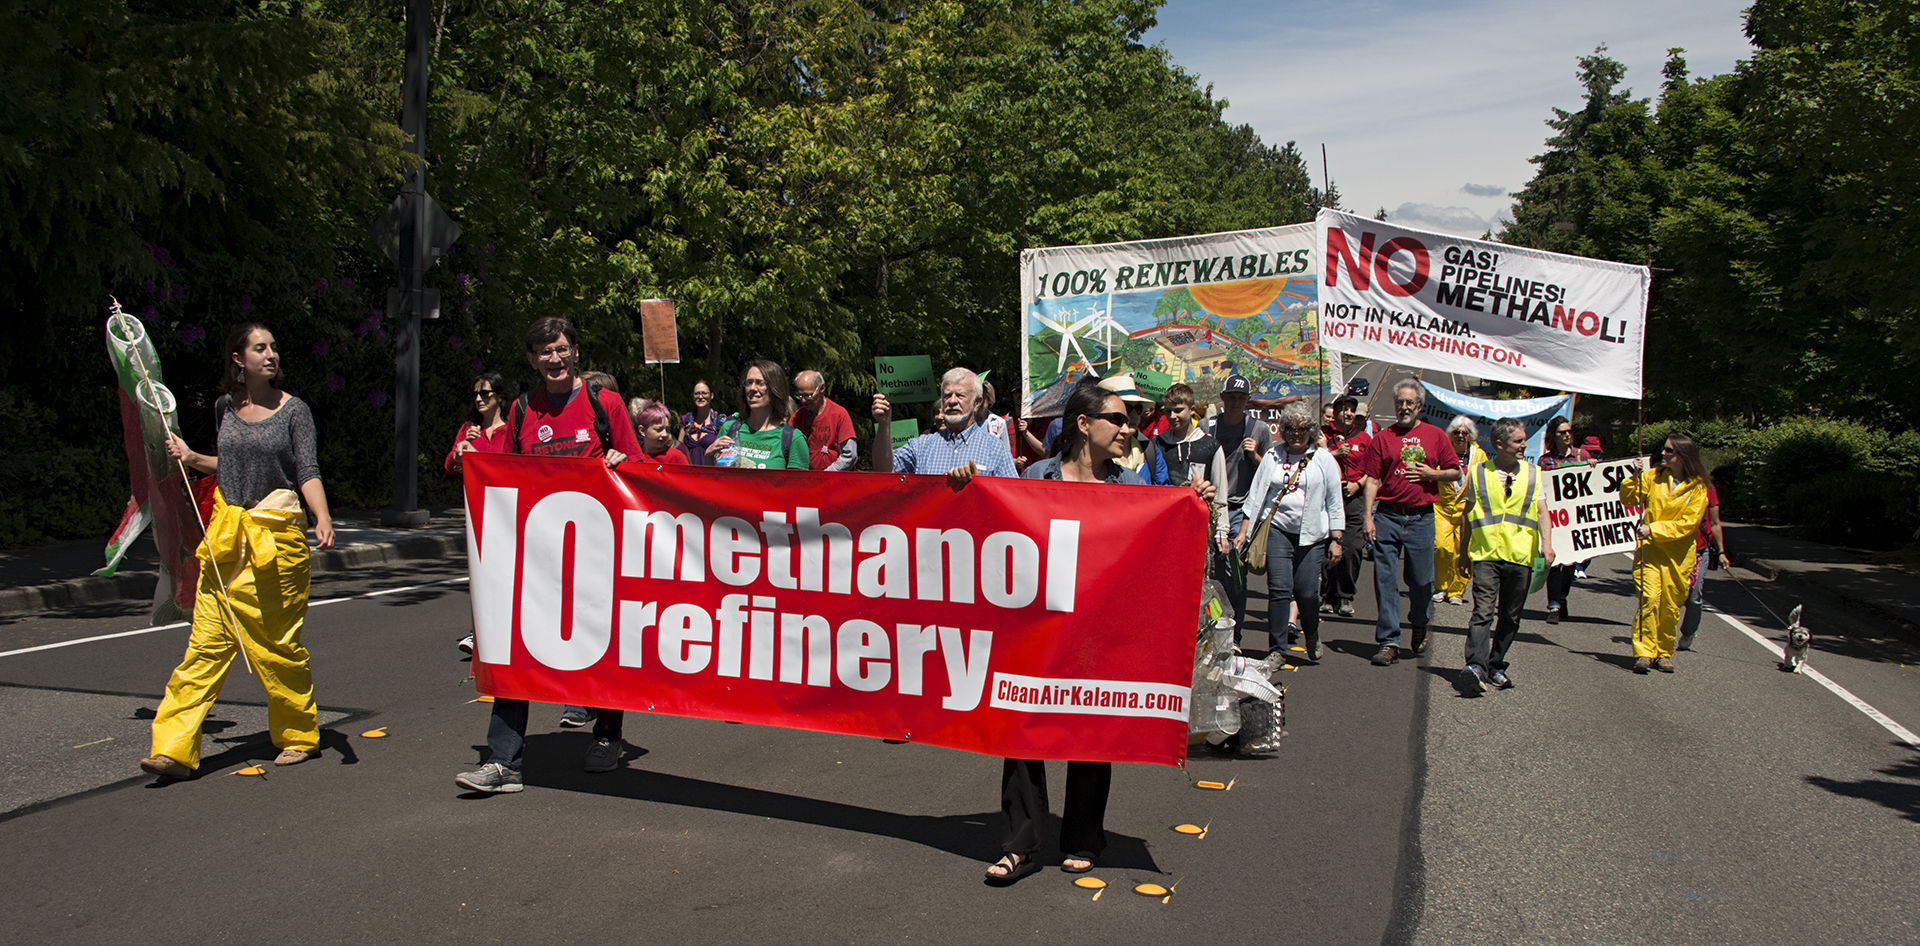 A group of protestors marching down the street holding a large banner between them. The banner is red with white letters and it reads: No methanol refinery! It has a link on the bottom right corner for CleanAirKalama.com.